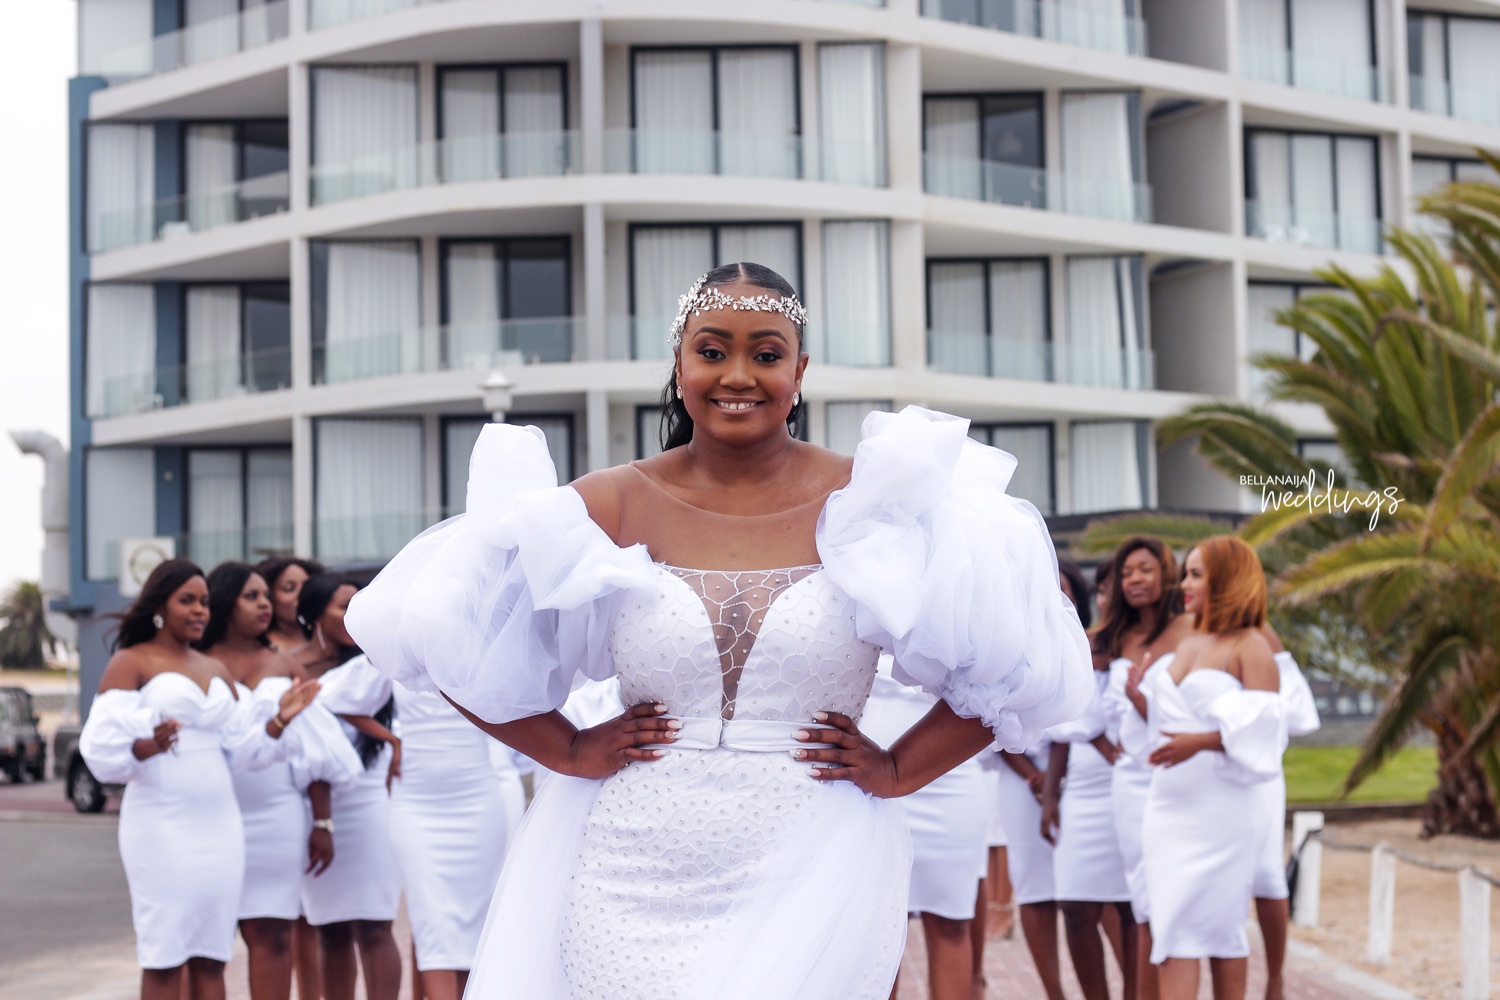 Bridal shower ideas, outfits and how to plan one in Nigeria